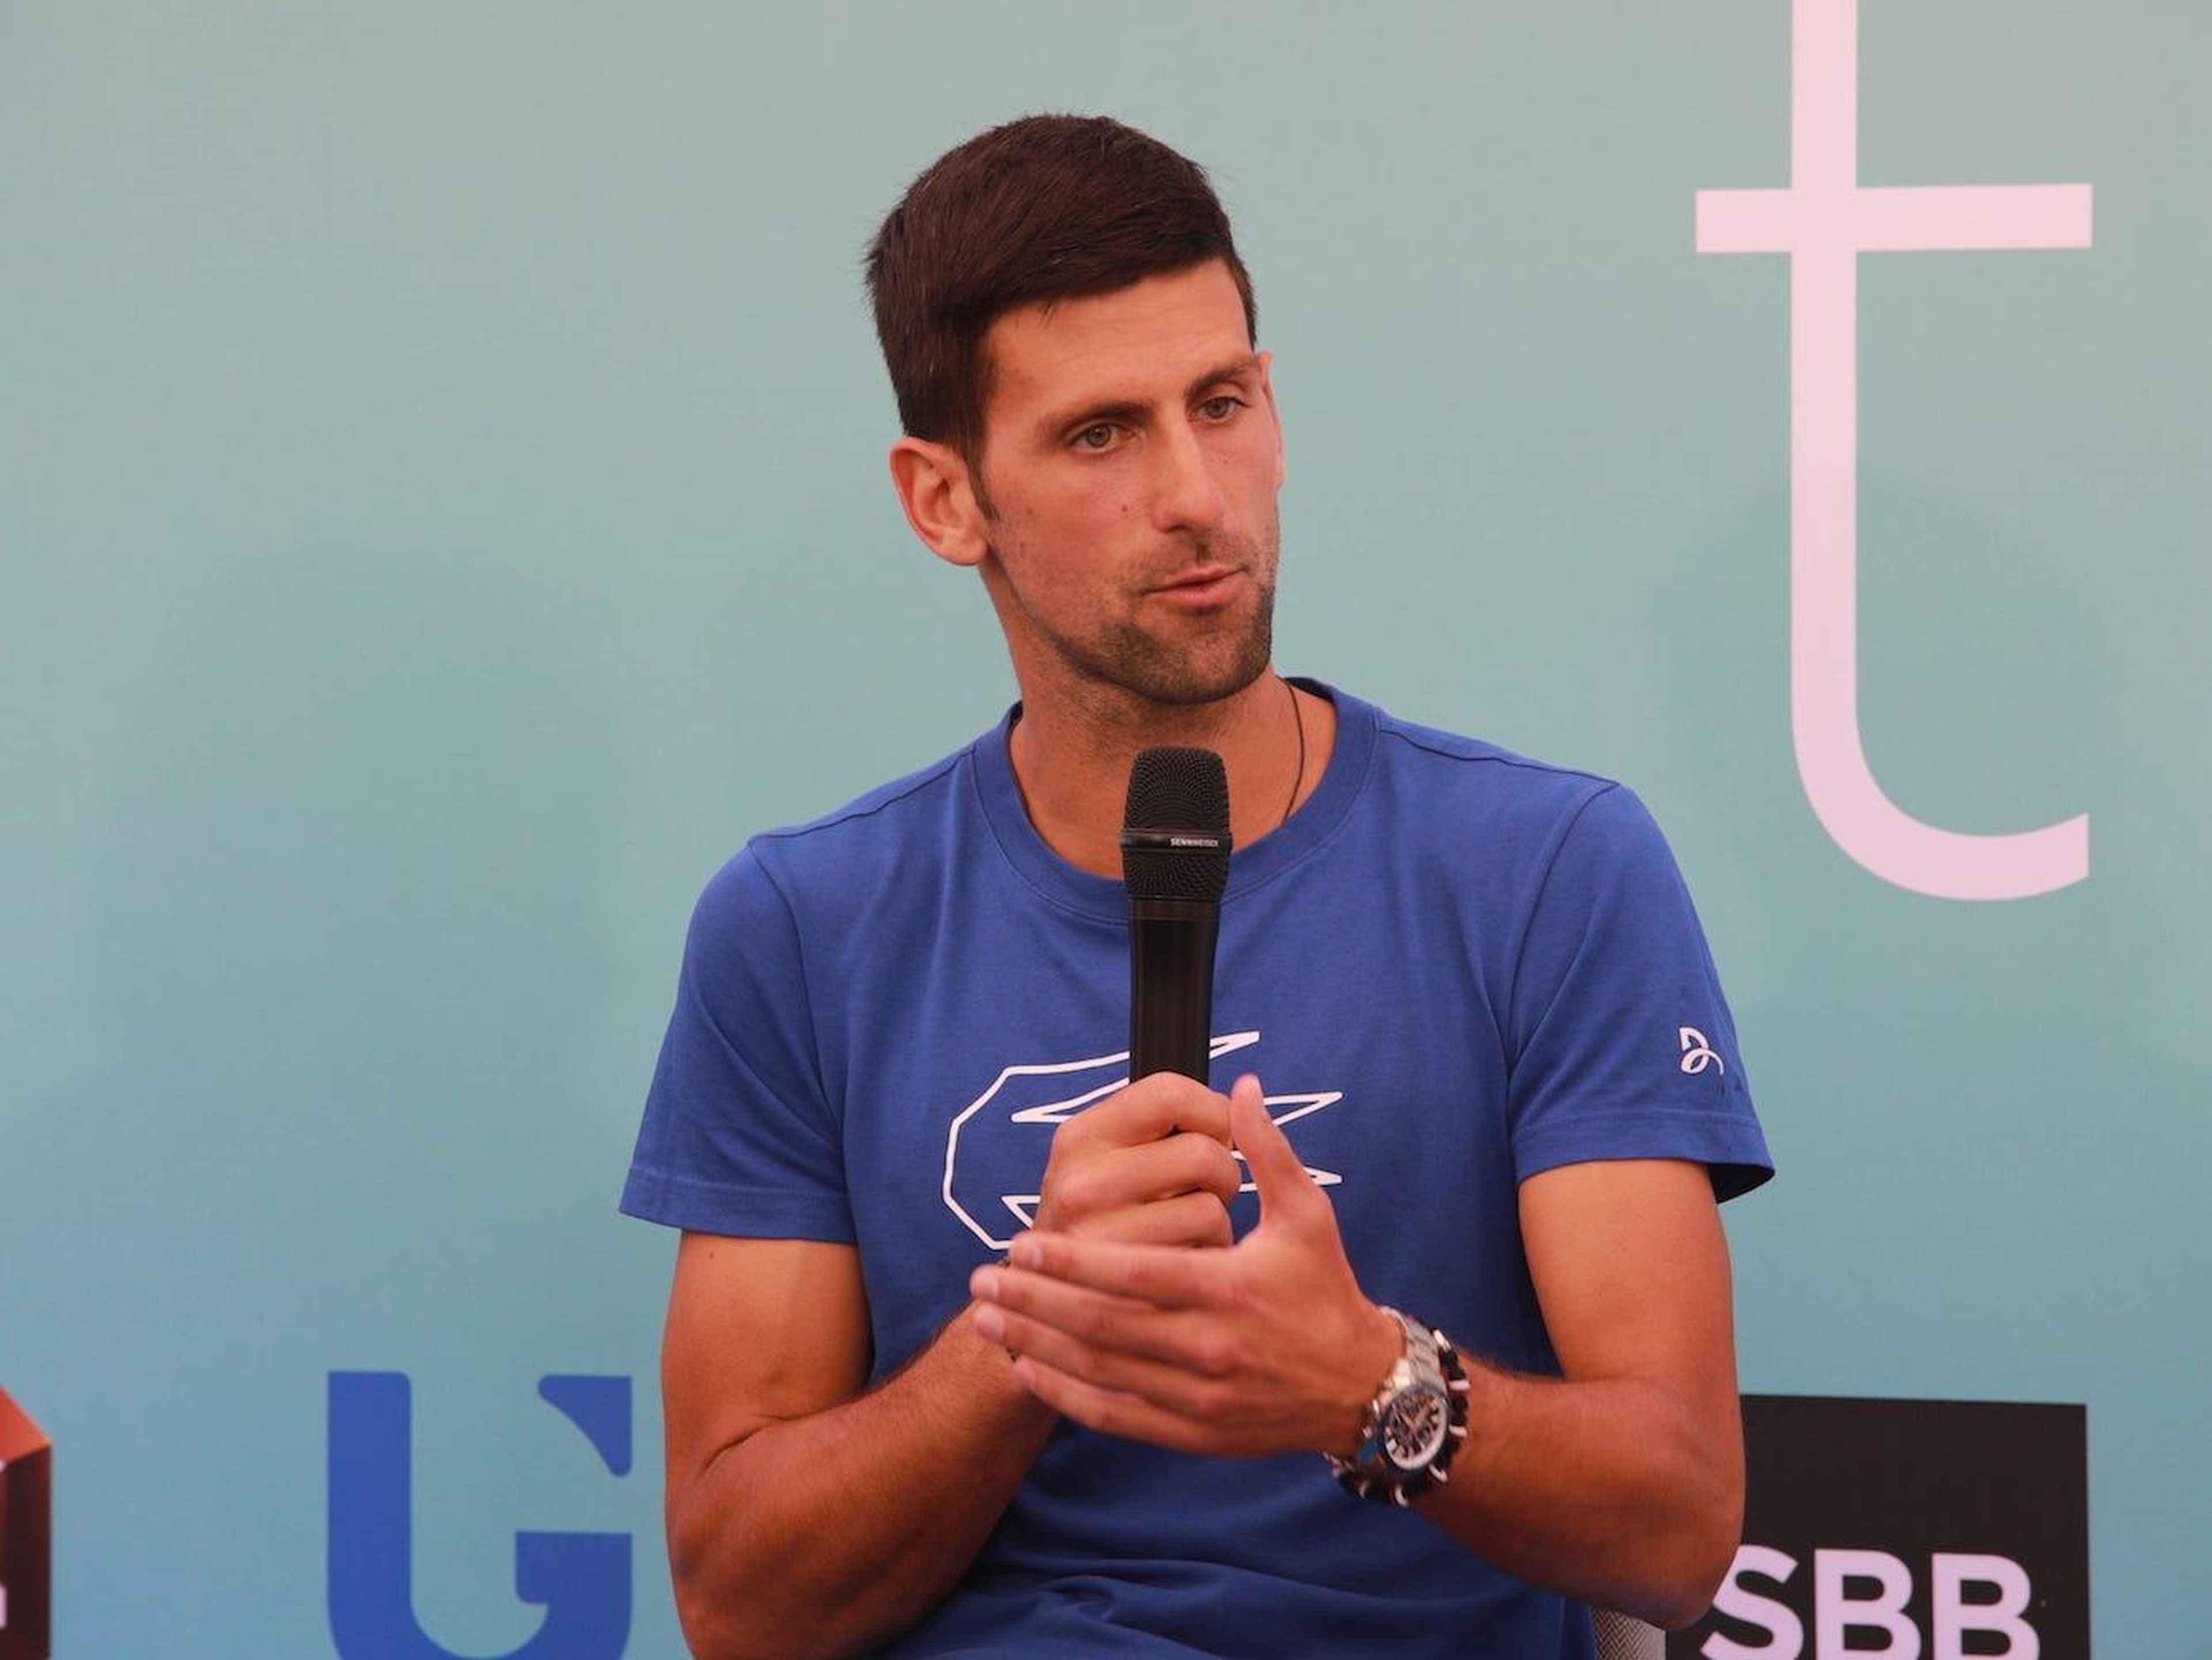 Novak Djokovic attends a press conference during an opening program of the Adria Tour, a charity exhibition hosted by Novak Djokovic Foundation, on June 12, 2020 in Belgrade, Serbia. Milos Miskov/Anadolu Agency via Getty Images